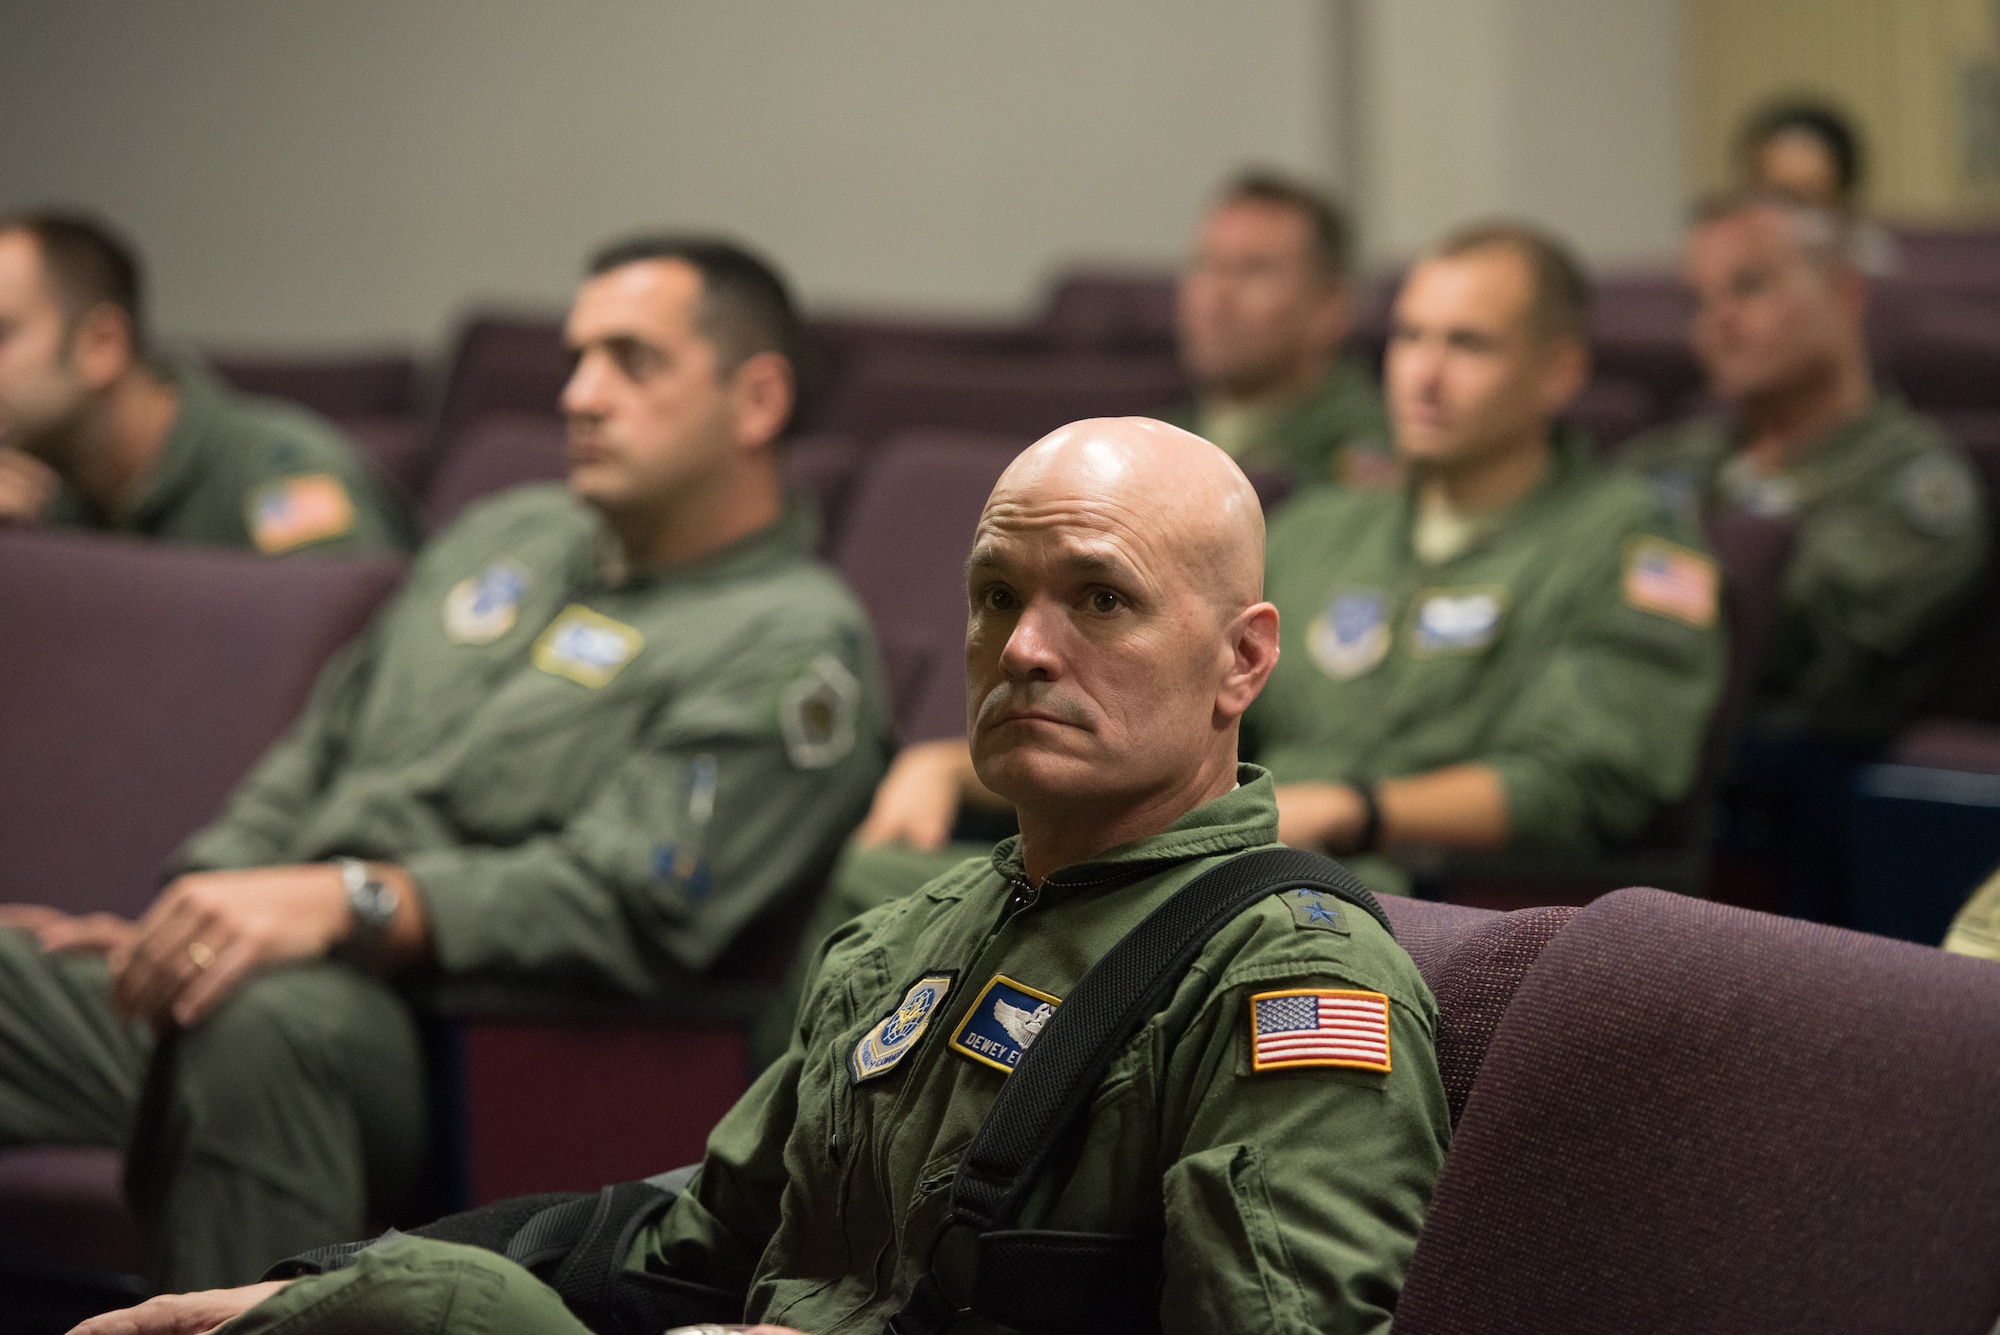 The commander of Air Mobility Command, Gen. Carlton D. Everhart II, attends an operations briefing with Airmen from the 123rd Airlift Wing during a tour of the Kentucky Air National Guard Base in Louisville, Ky., Aug. 3, 2018. The wing is home to 1,200 Airmen and eight C-130H Hercules aircraft. (U.S. Air National Guard photo by Airman Chloe Ochs)